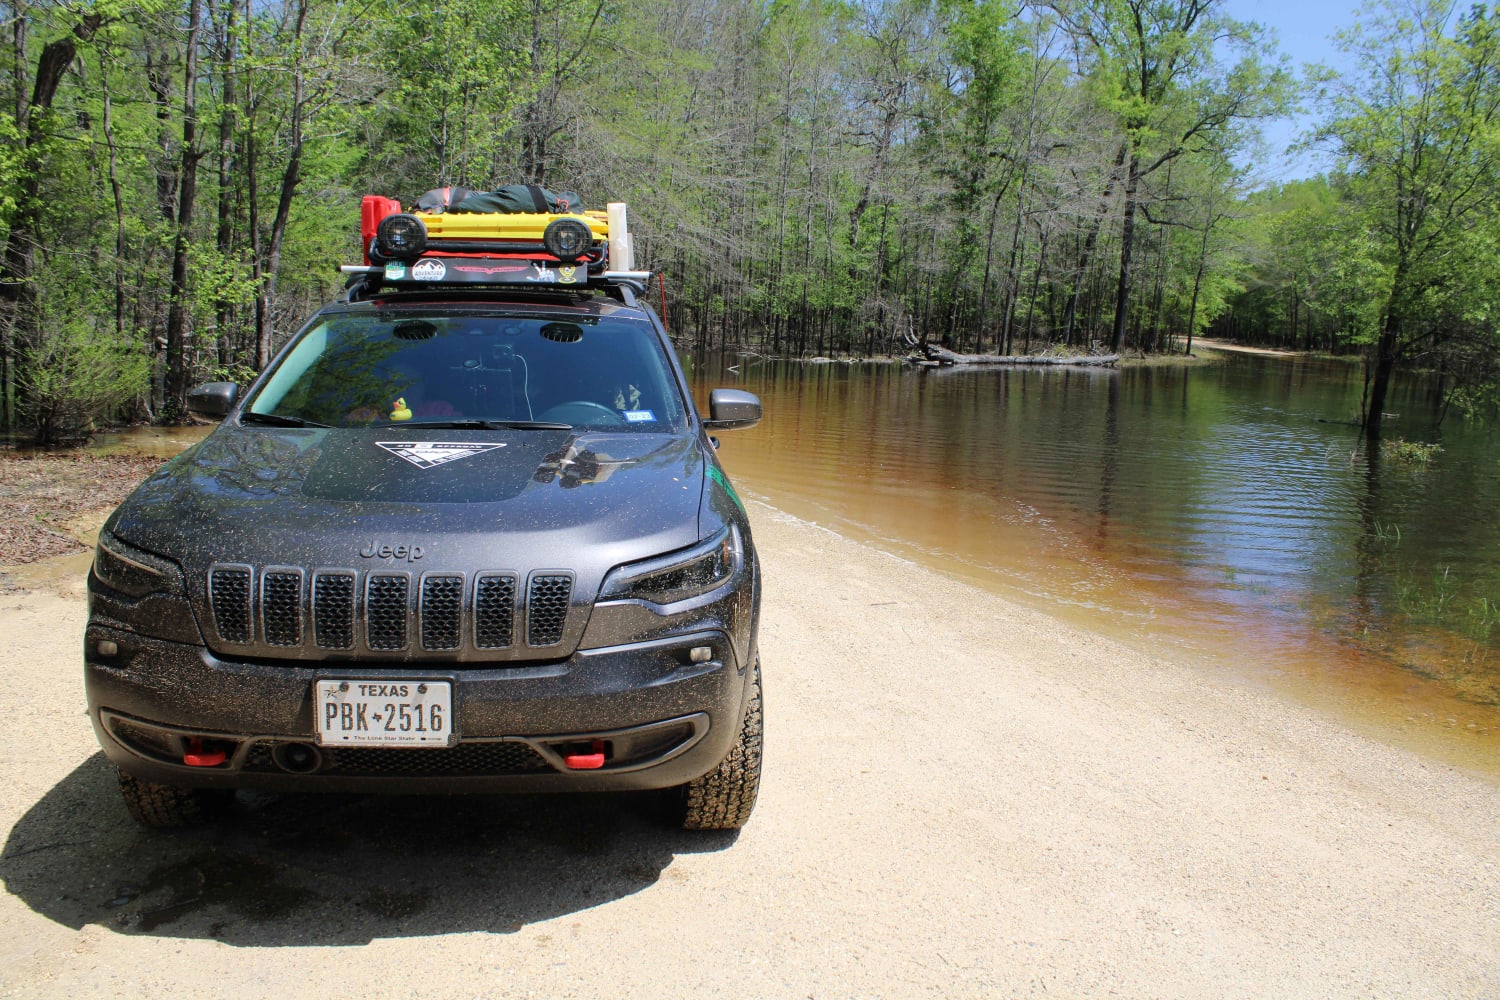 The Arkansas Overland Route - TrailHawk Loop - Section 17